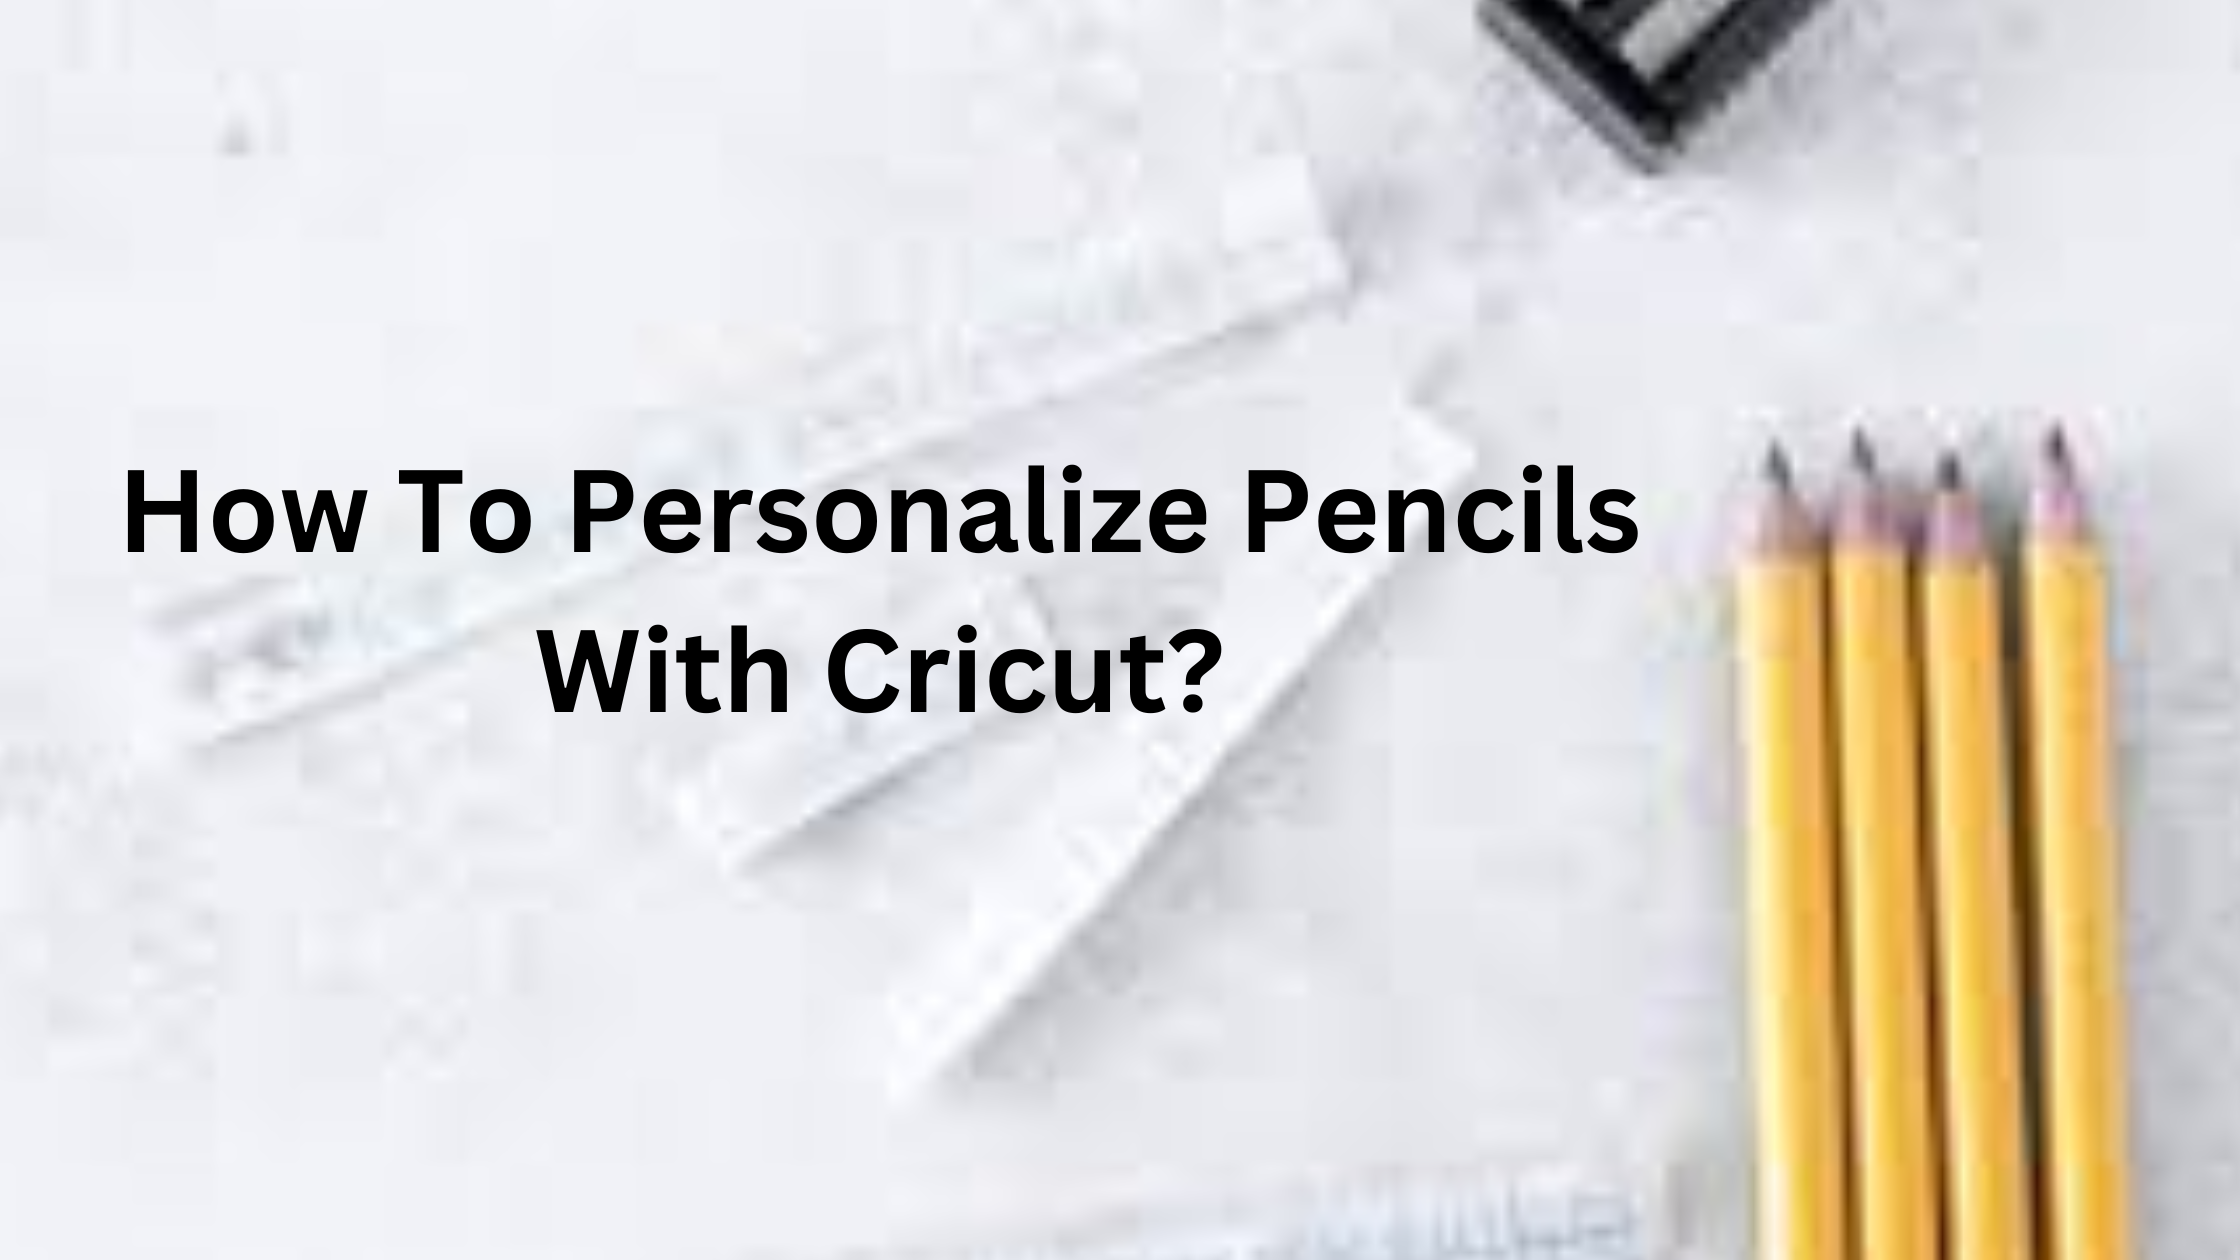 How To Personalize Pencils With Cricut?